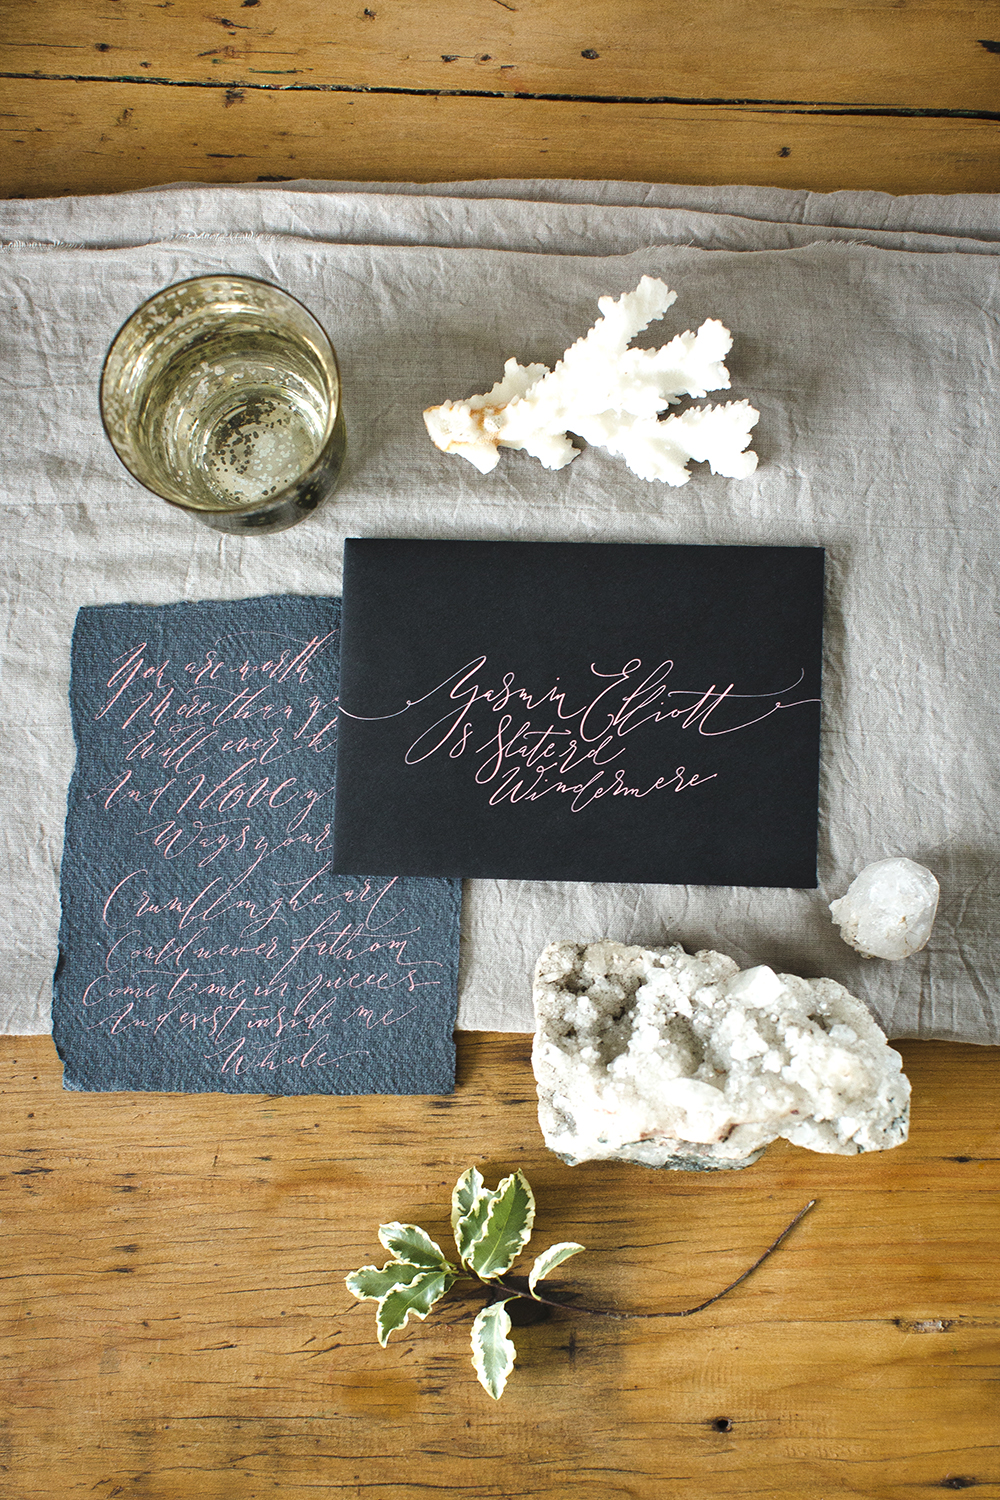 A calligraphy envelope with dusky pink ink on black paper, and a calligraphy love letter to one side. The handwritten wedding items are surrounded by natural objects including a chunk of quartz, some holly leaves and sea coral, and sat on a folded sheet of muslin cloth